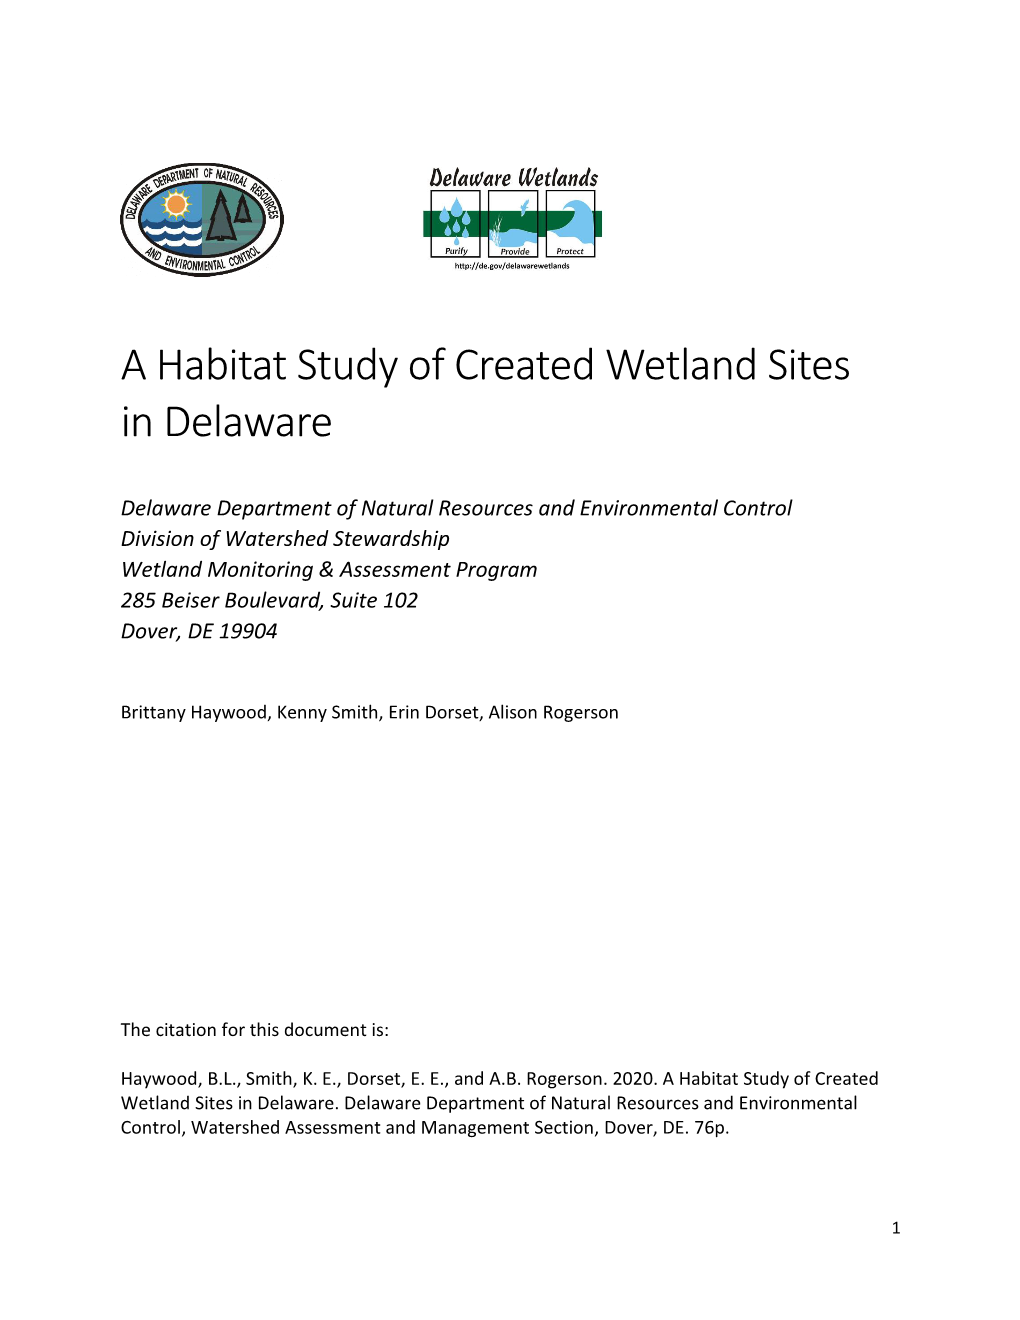 A Habitat Study of Created Wetland Sites in Delaware